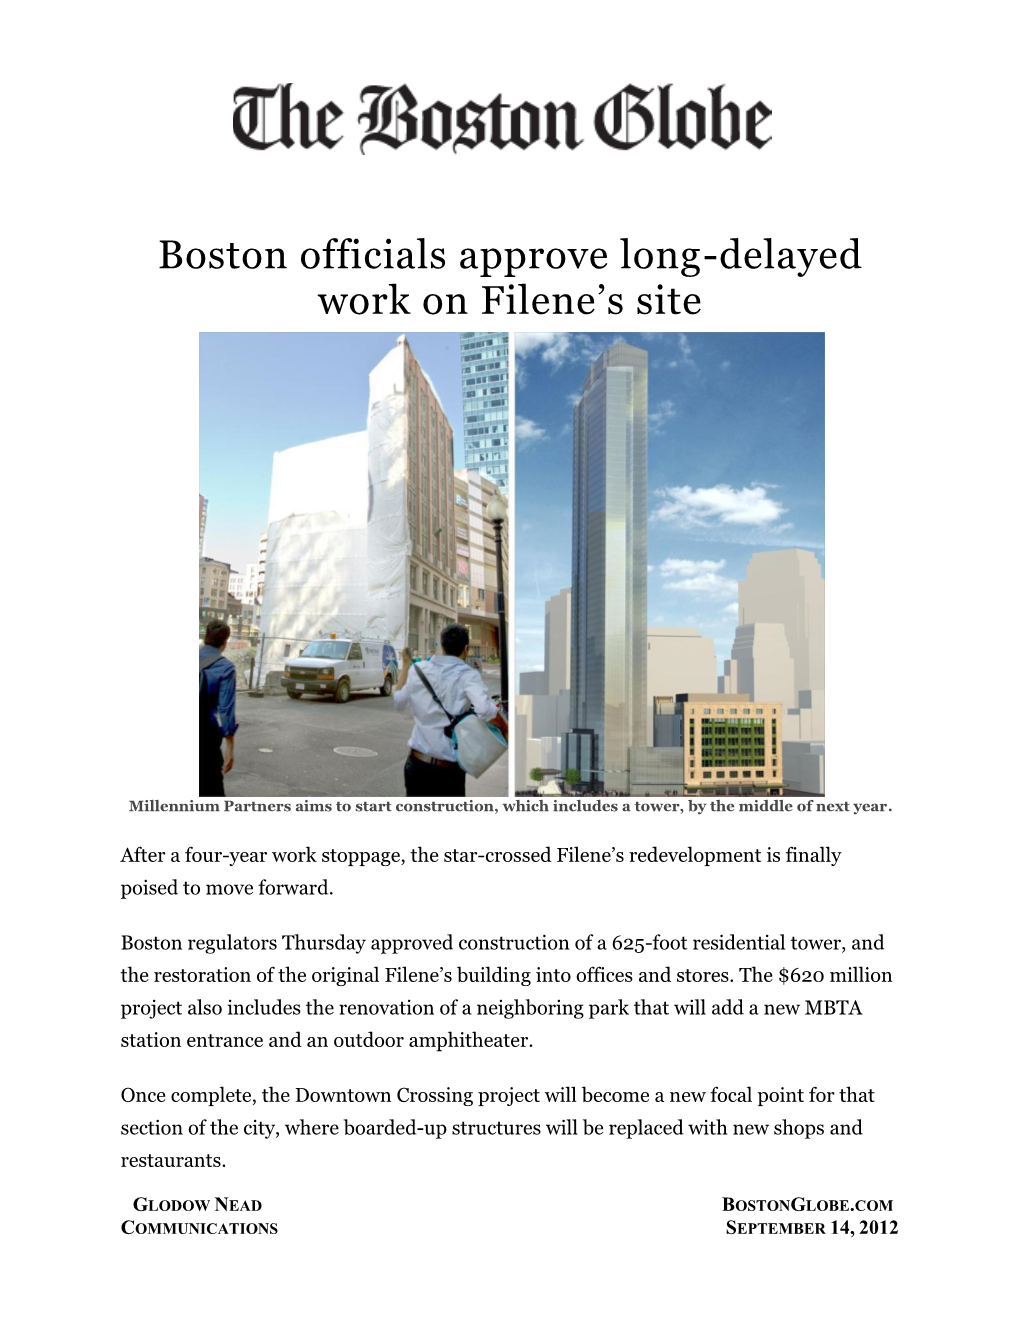 Boston Officials Approve Long-Delayed Work on Filene's Site